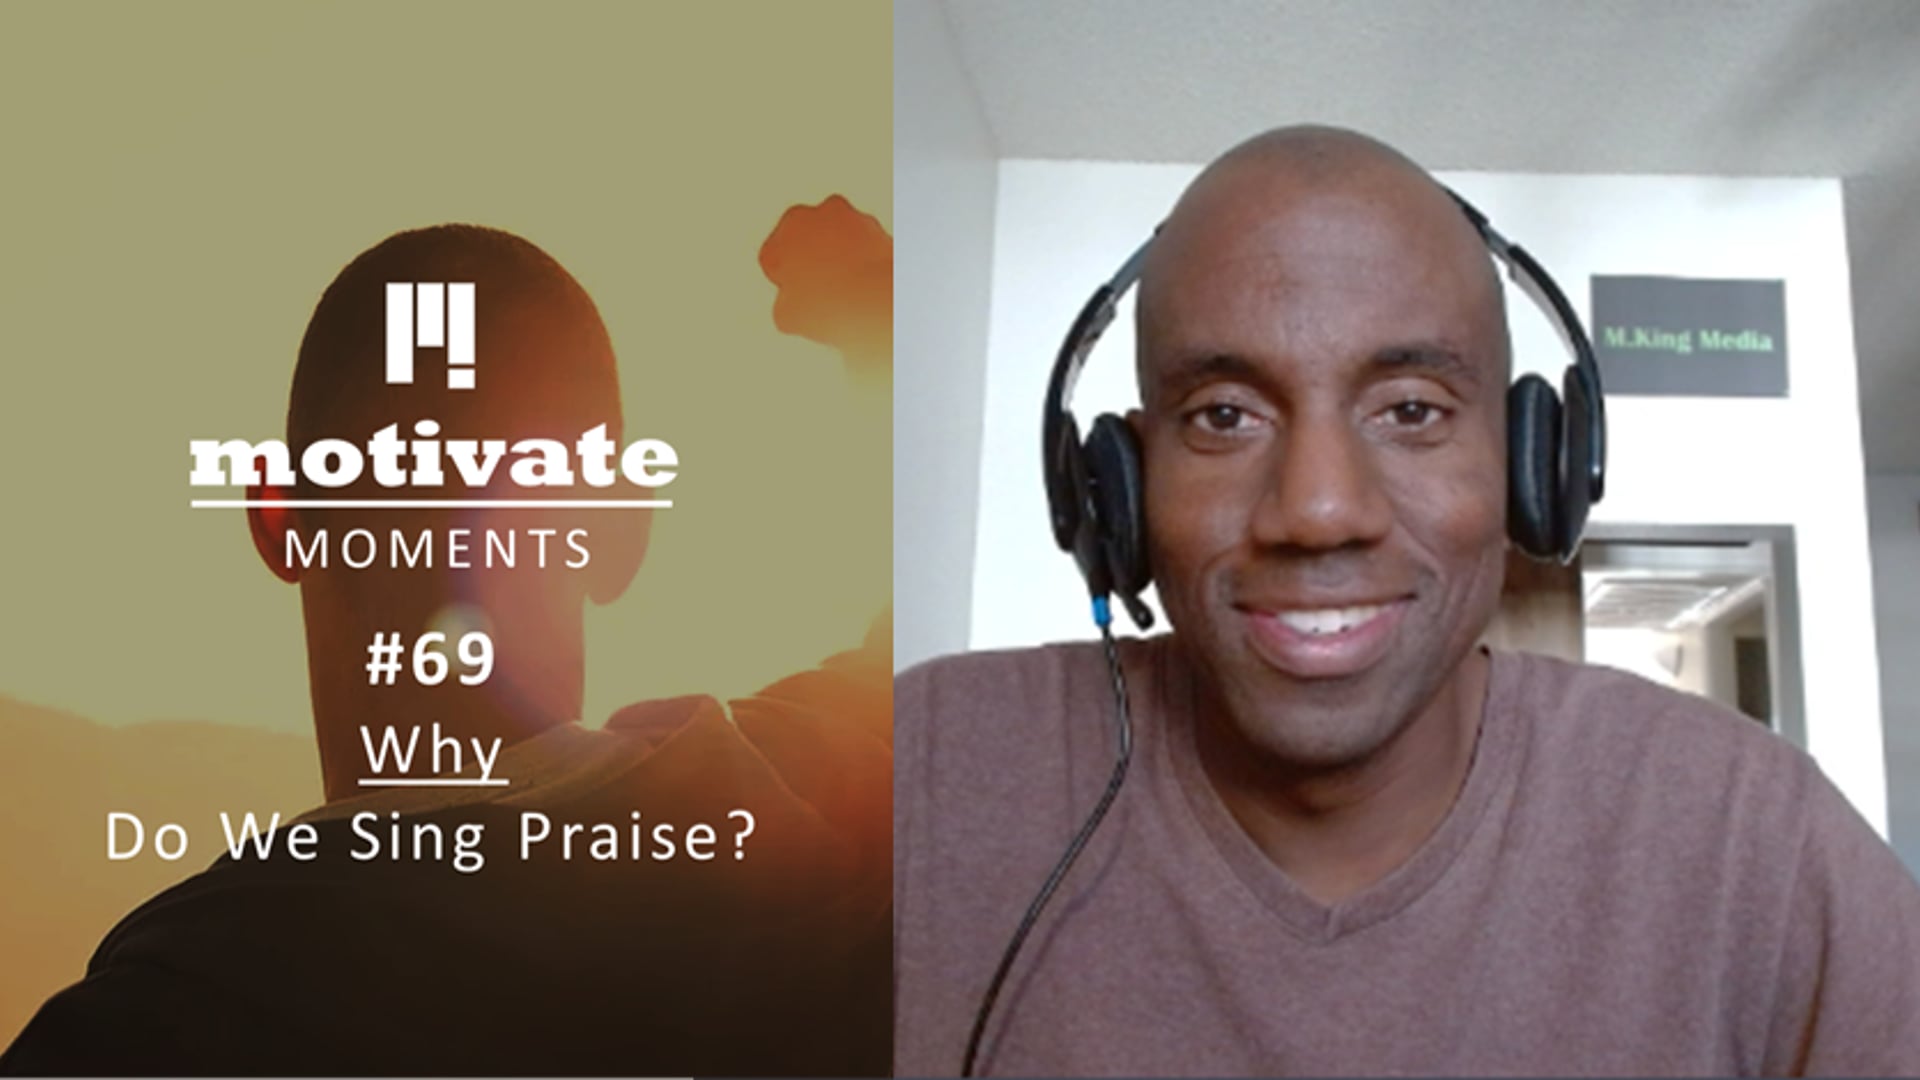 Motivate Moments #69 Why - Do We Sing Praise?